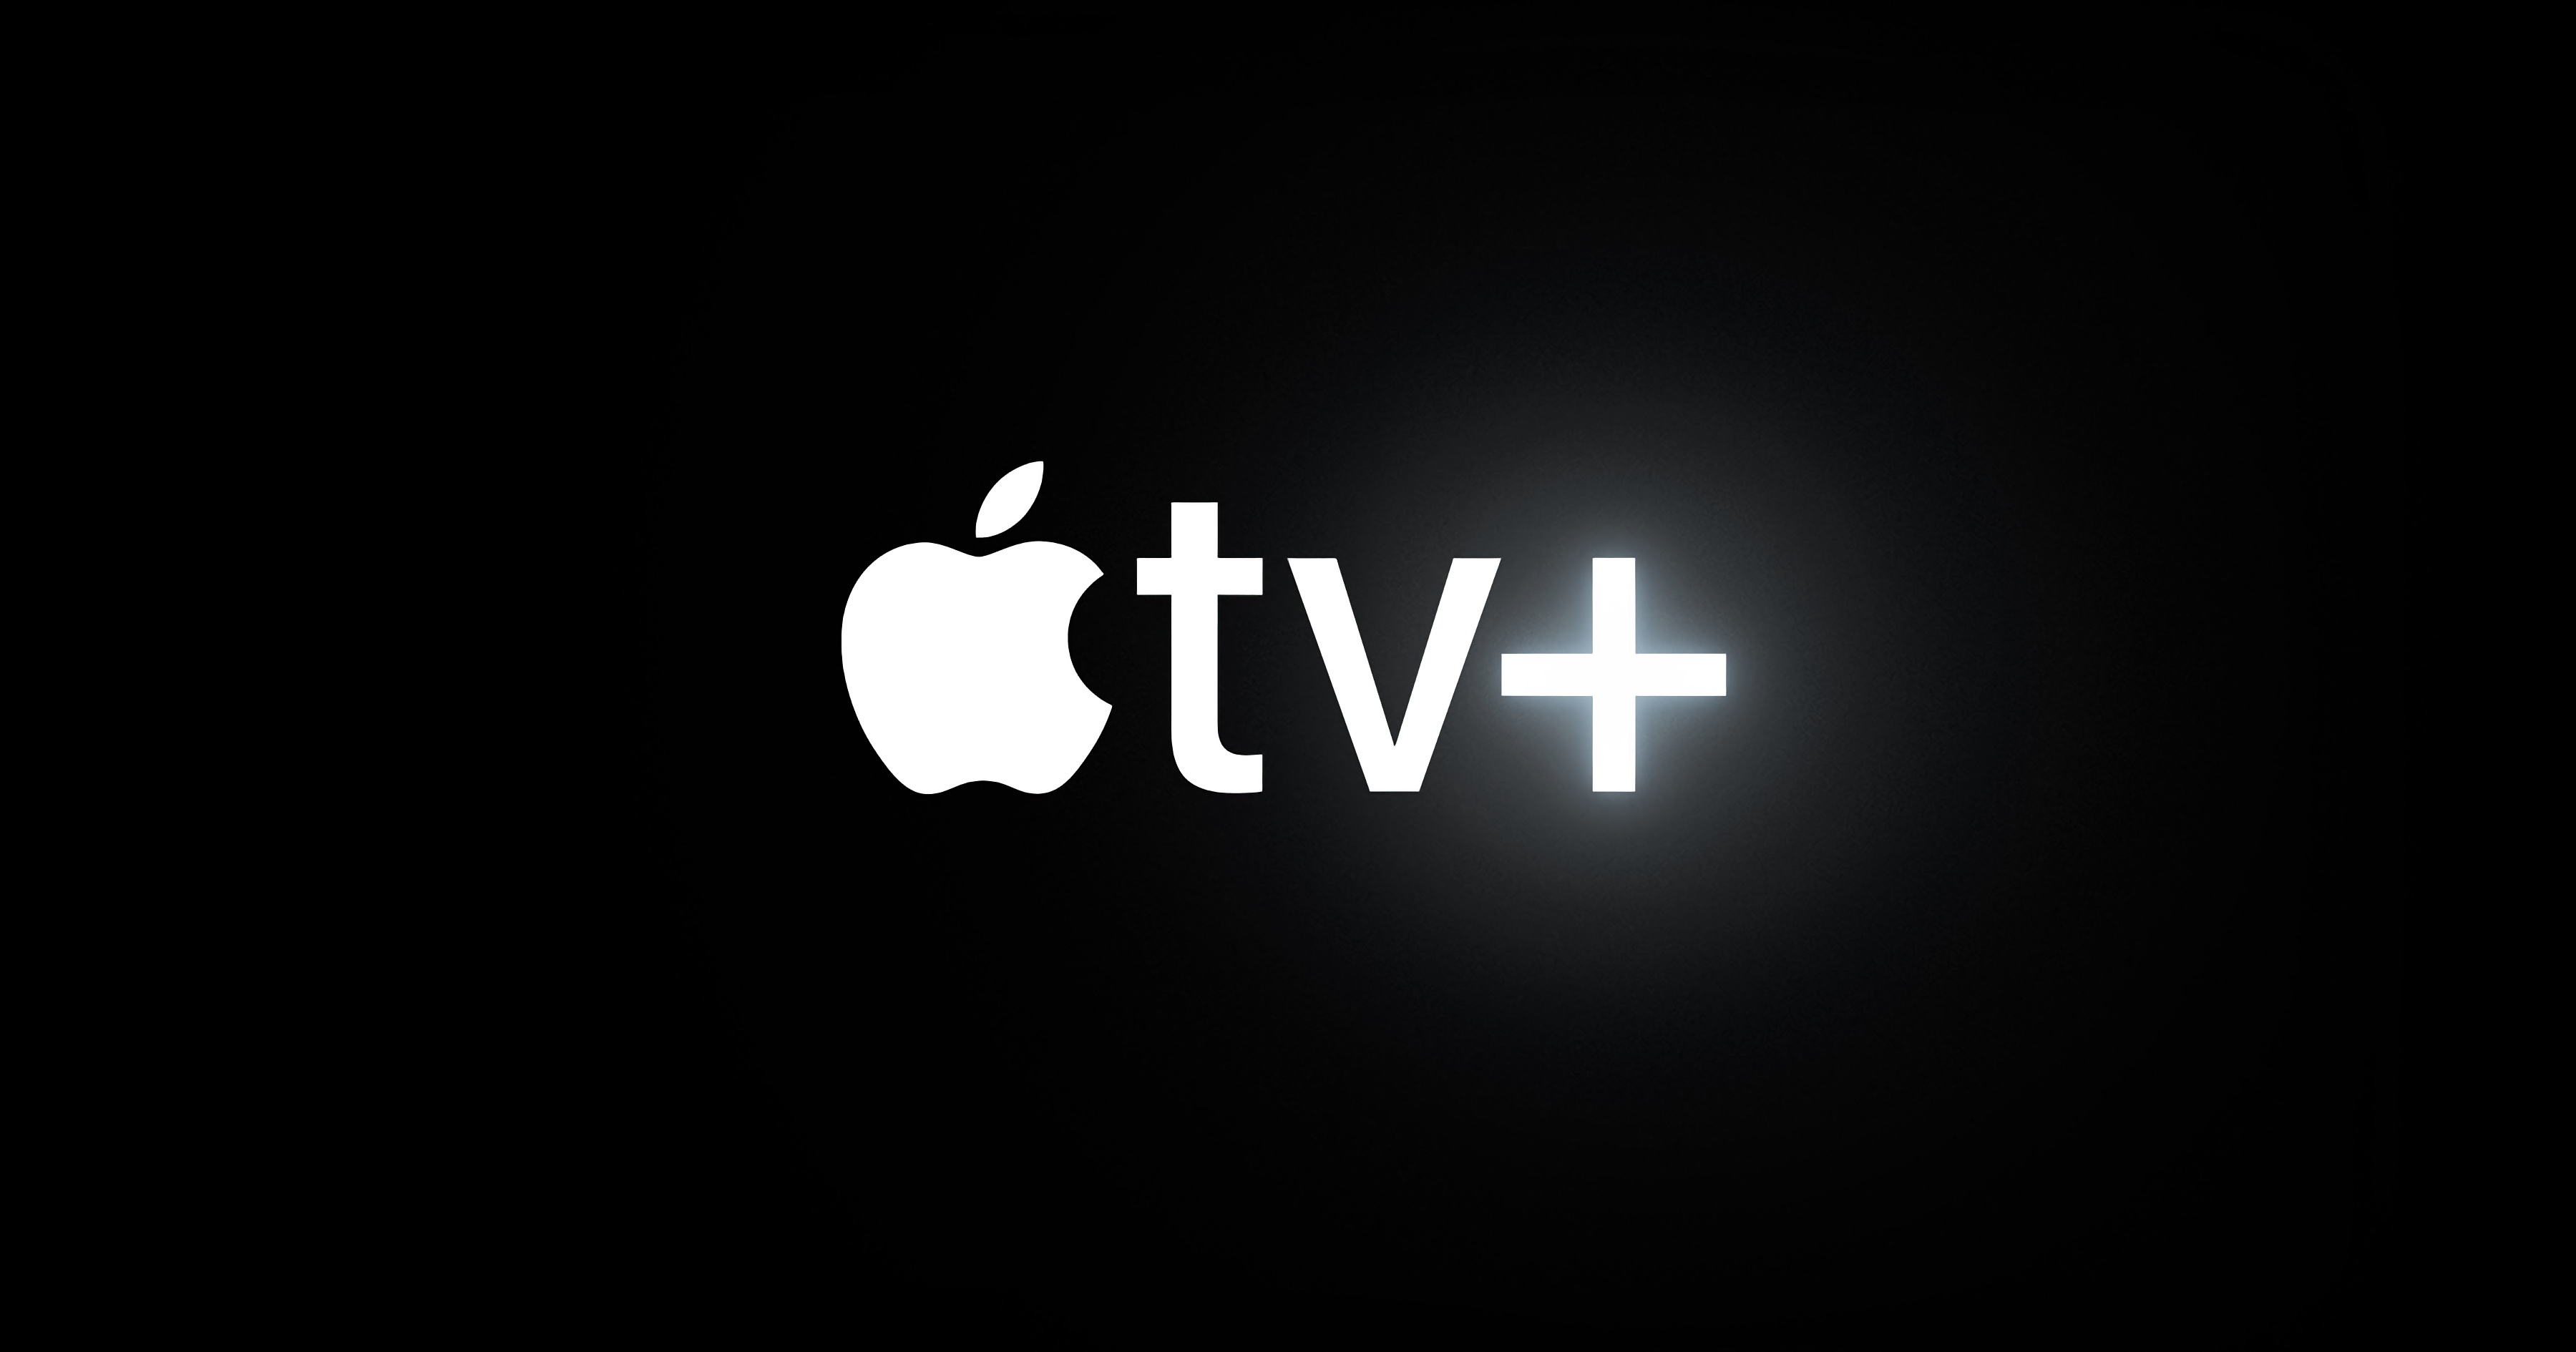 Apple TV+ the content out of all streaming - 9to5Mac